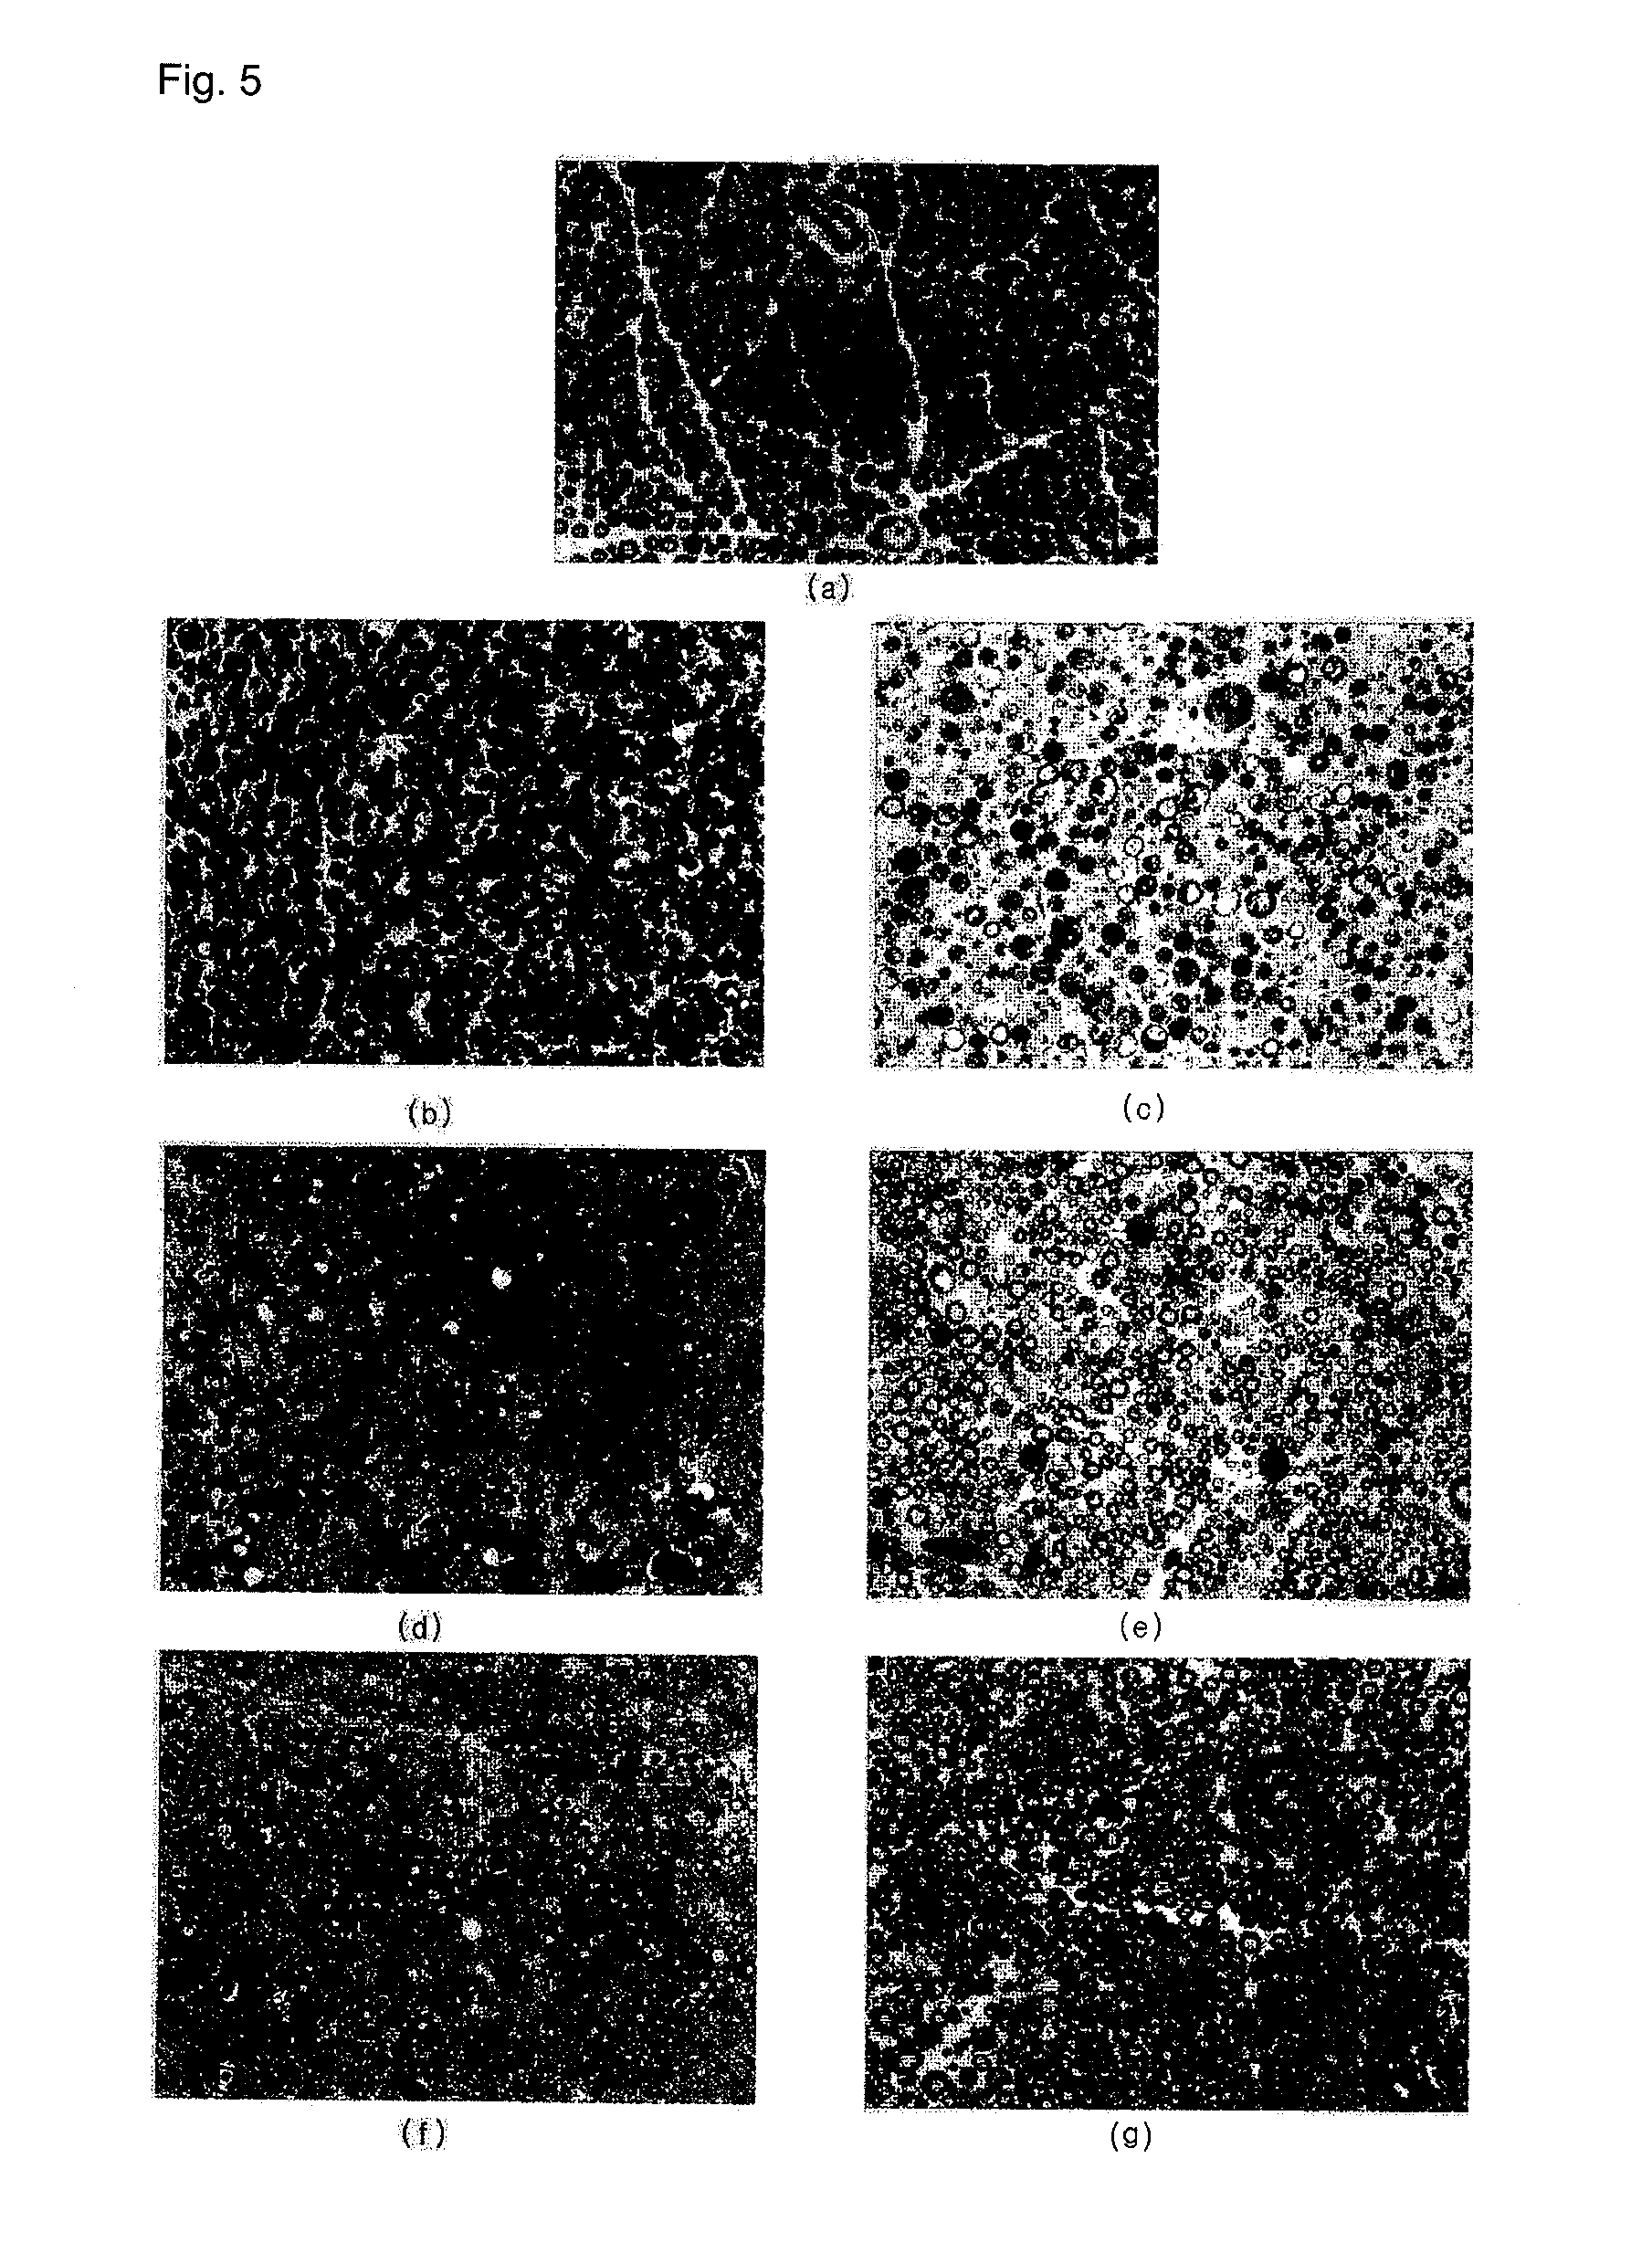 Pharmaceutical composition for preventing or treating neuronal damage and neurological diseases